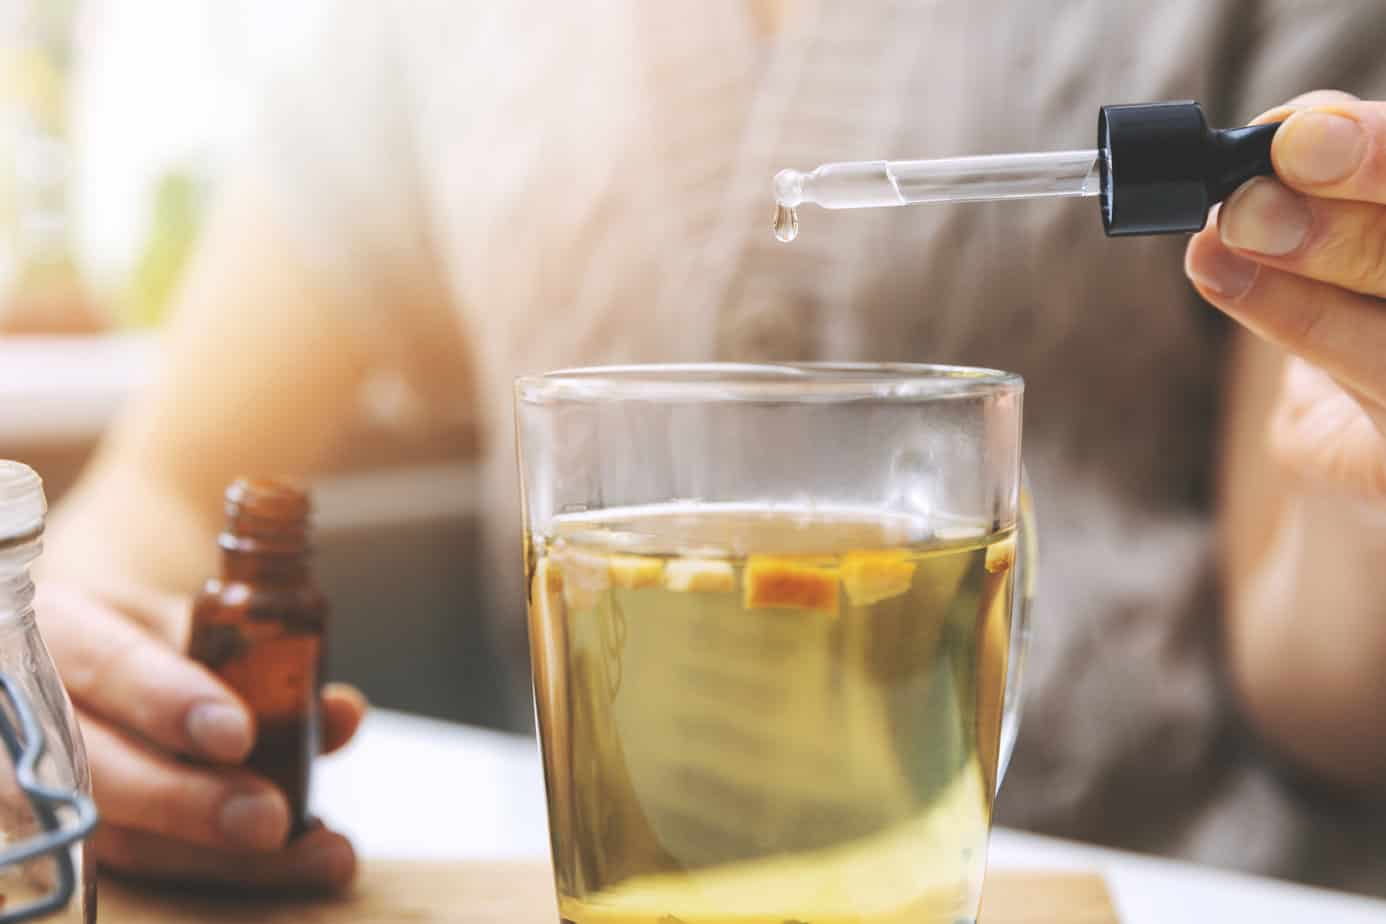 cbd being dropped into herbal tea